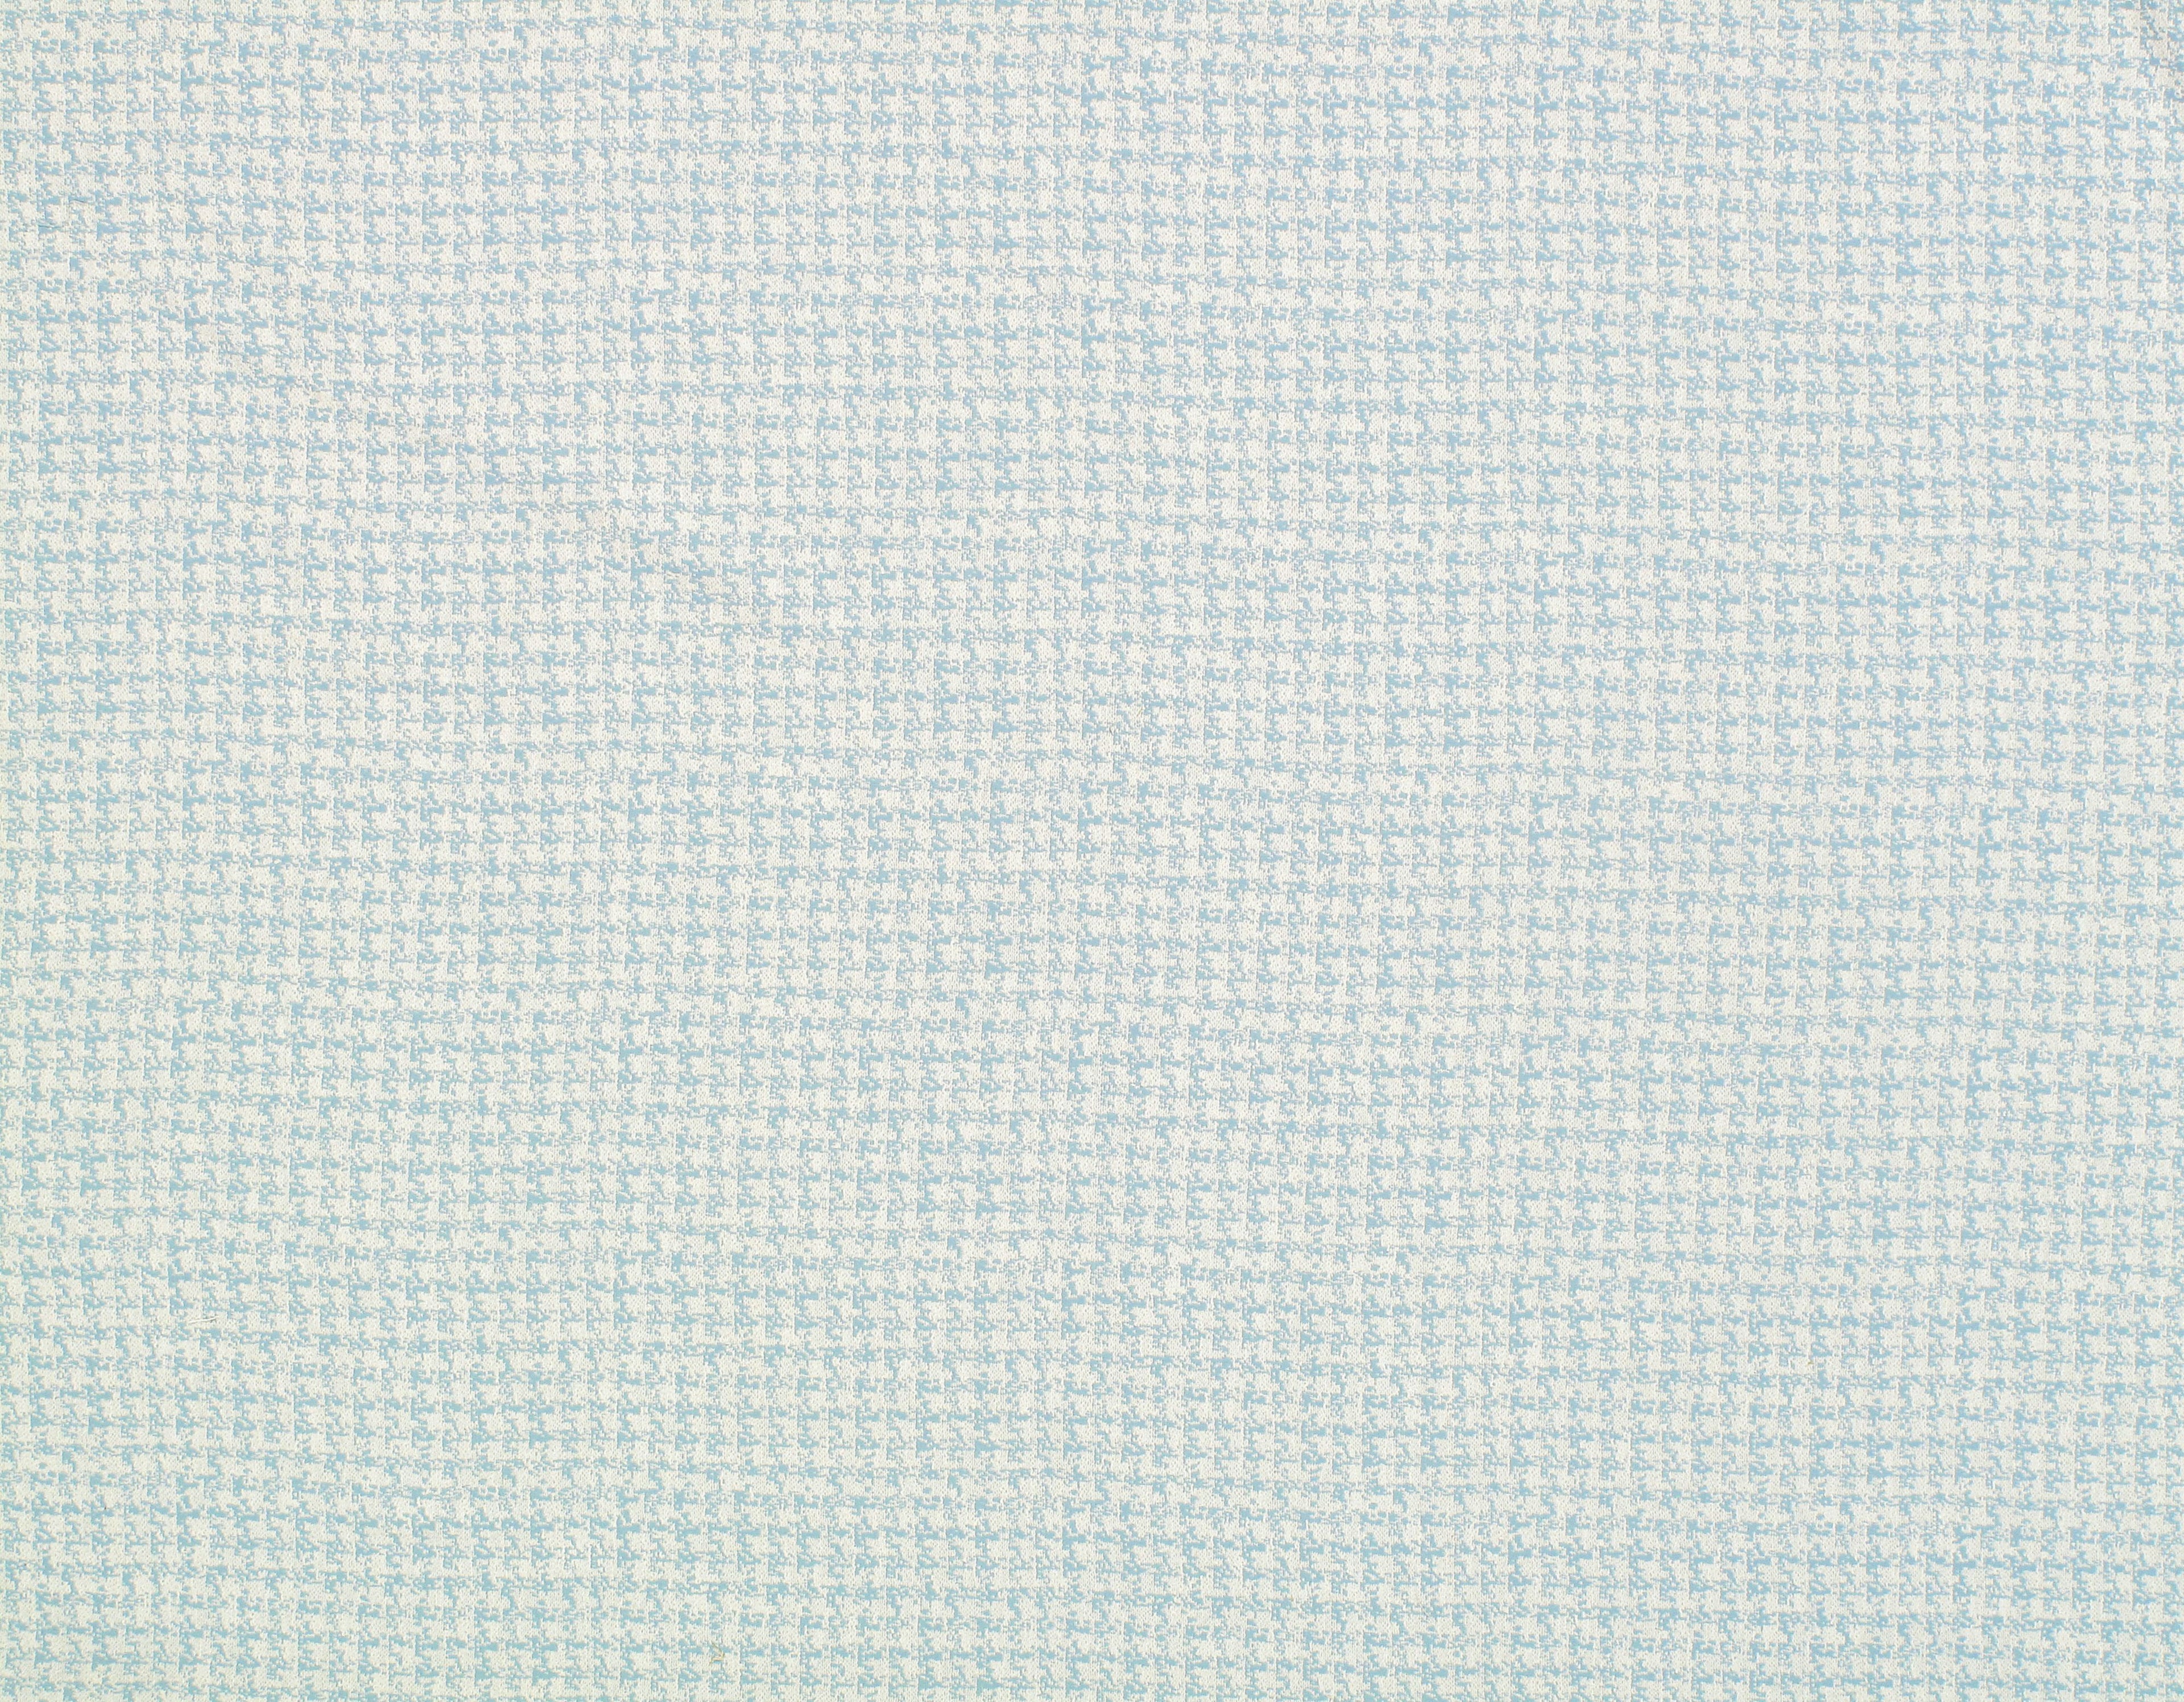 Downton fabric in aqua color - pattern number TL 00041393 - by Scalamandre in the Old World Weavers collection